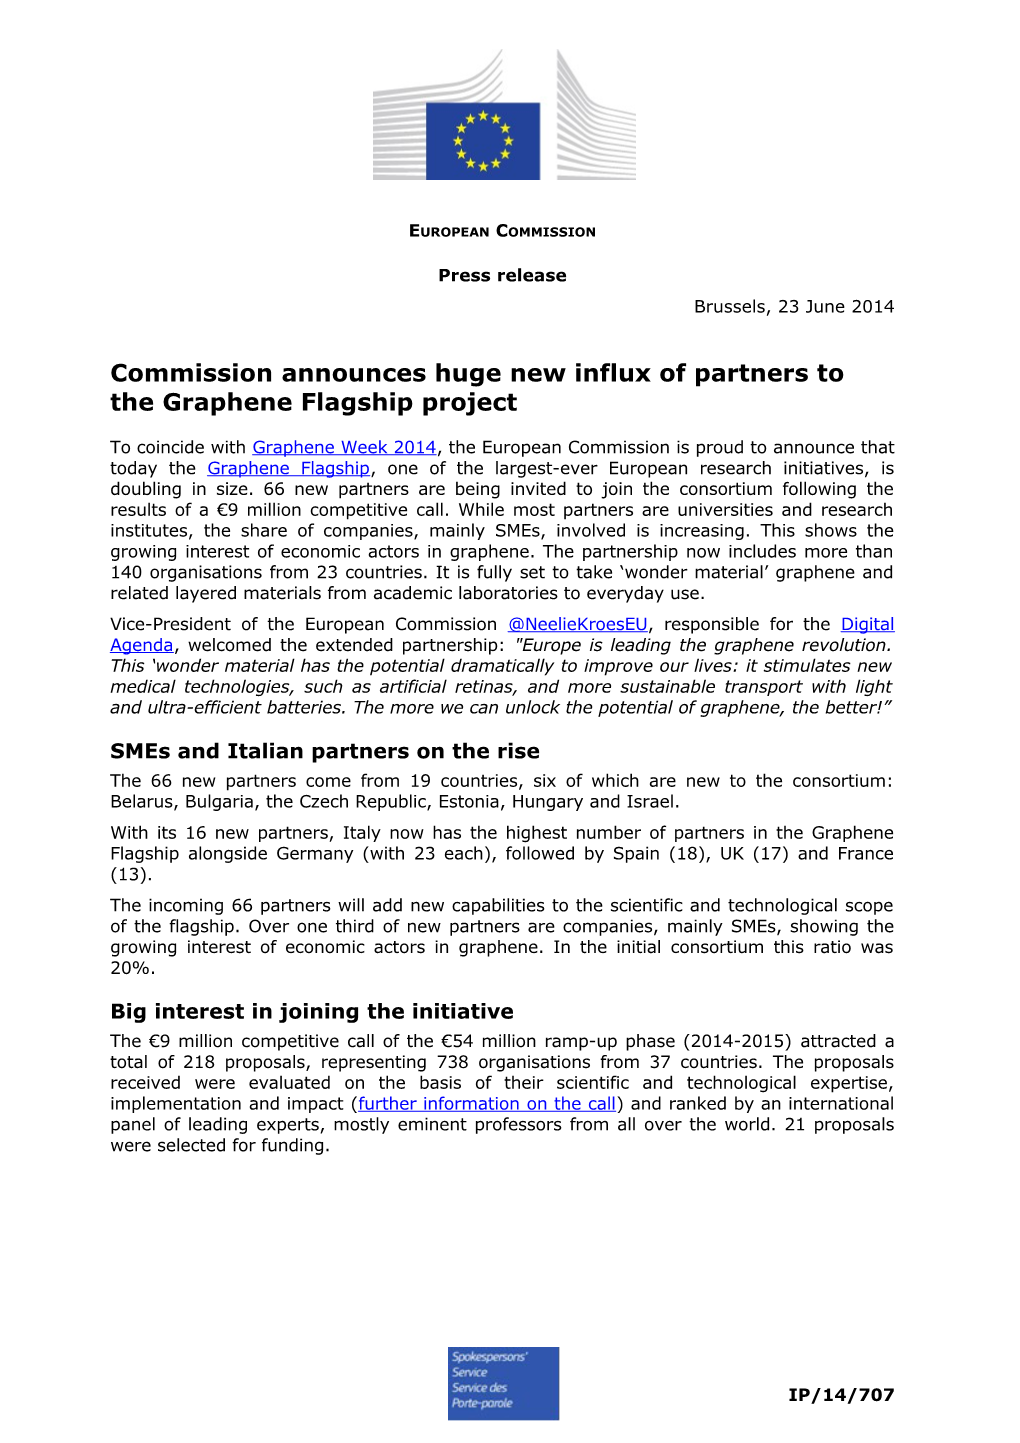 Commission Announces Huge New Influx of Partners to the Graphene Flagship Project